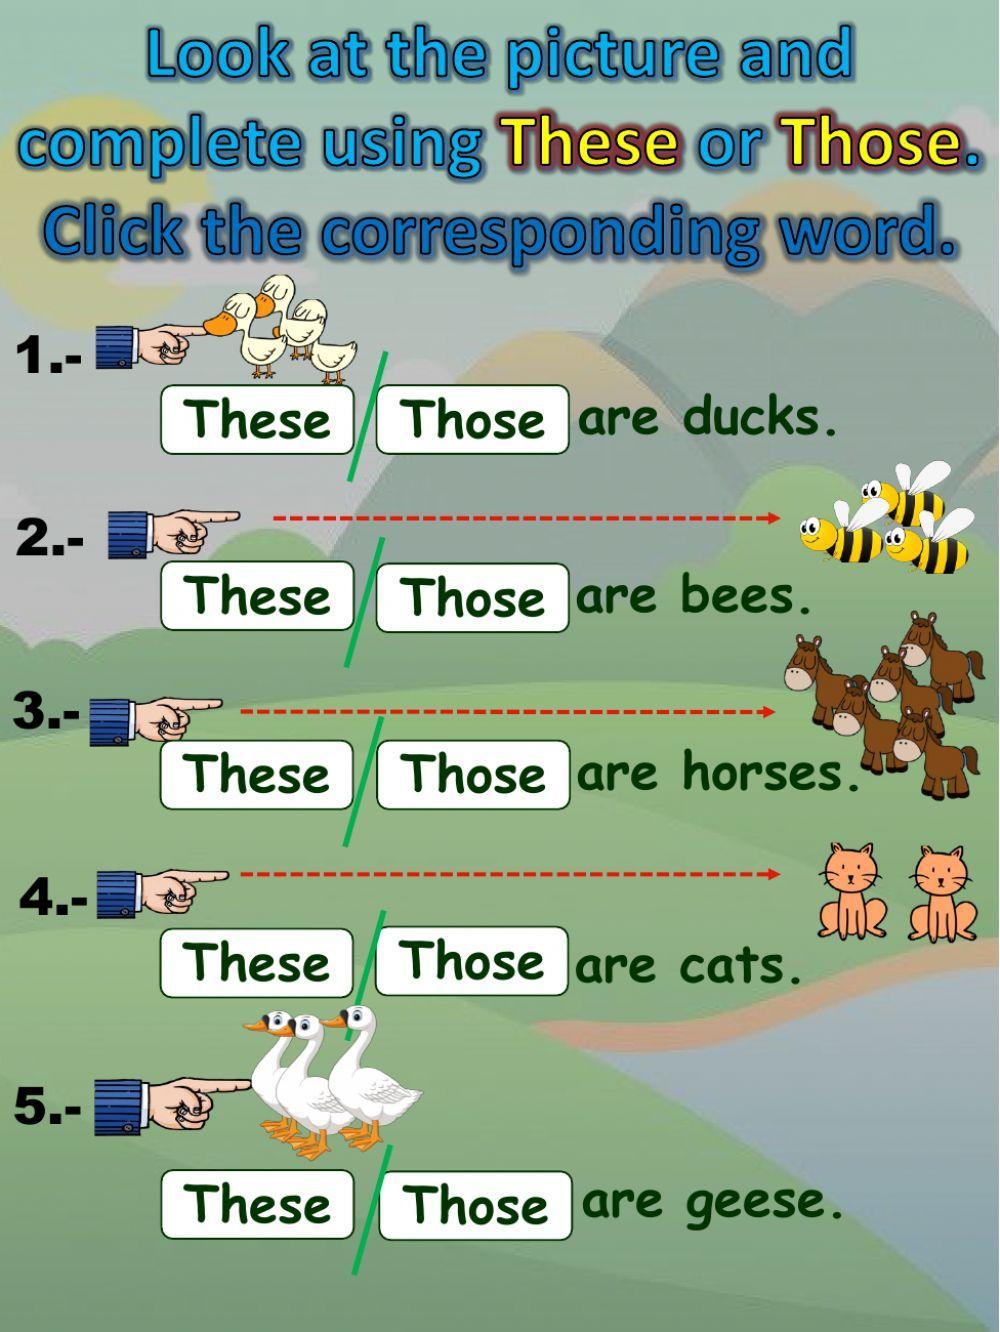 These are - Those are + Farm animals